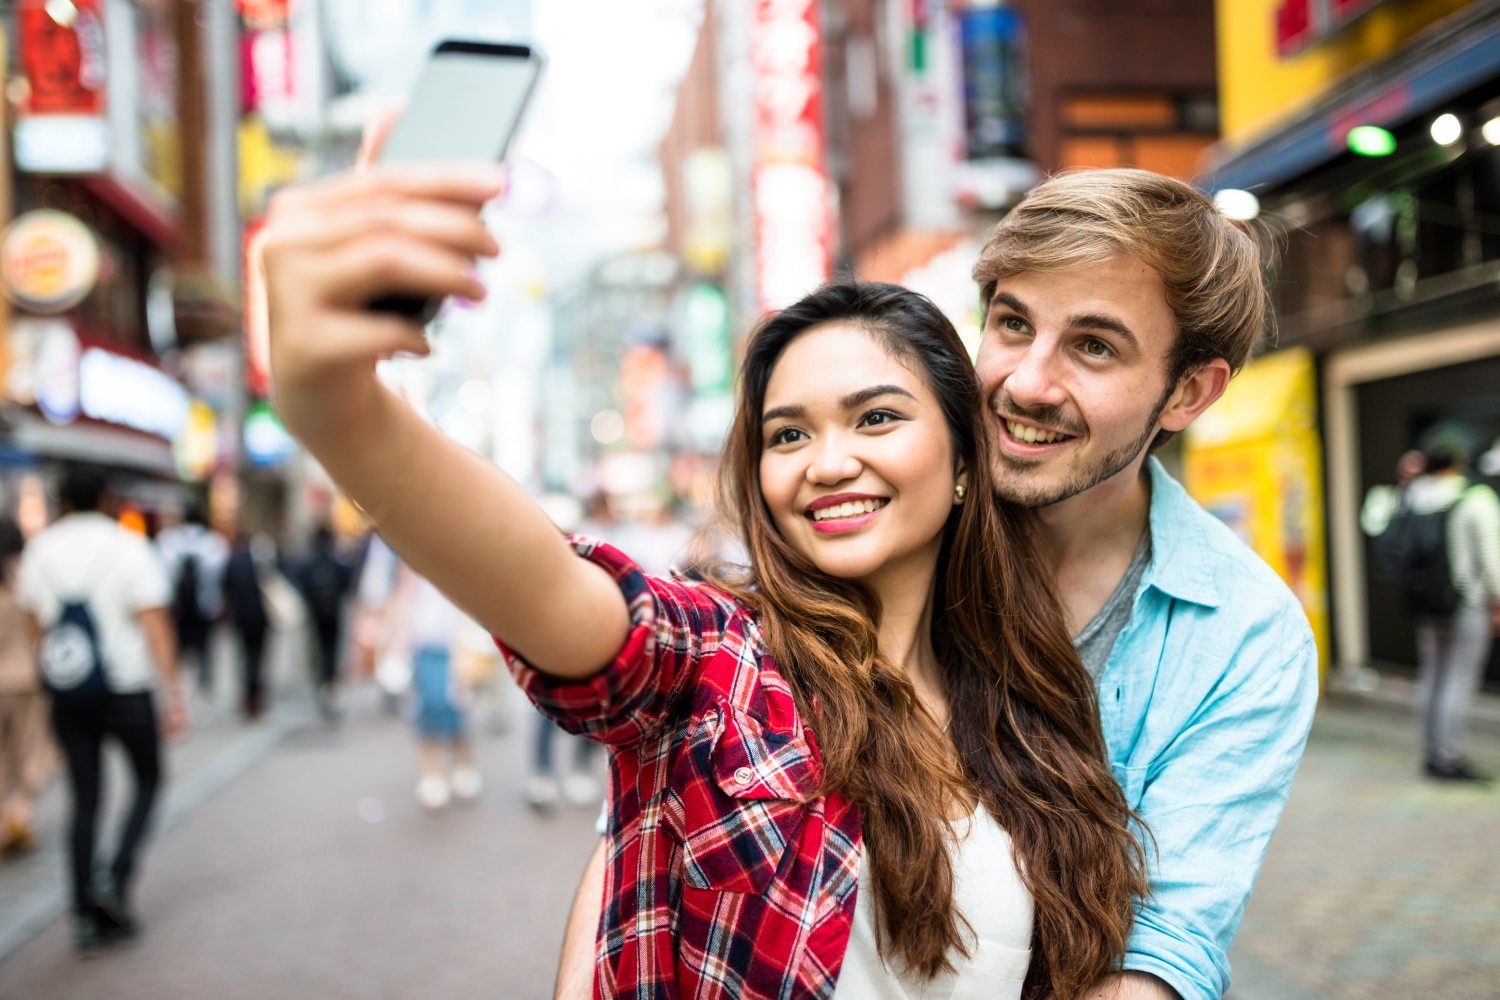 Two students pause to take a selfie in a busy street in Asia.